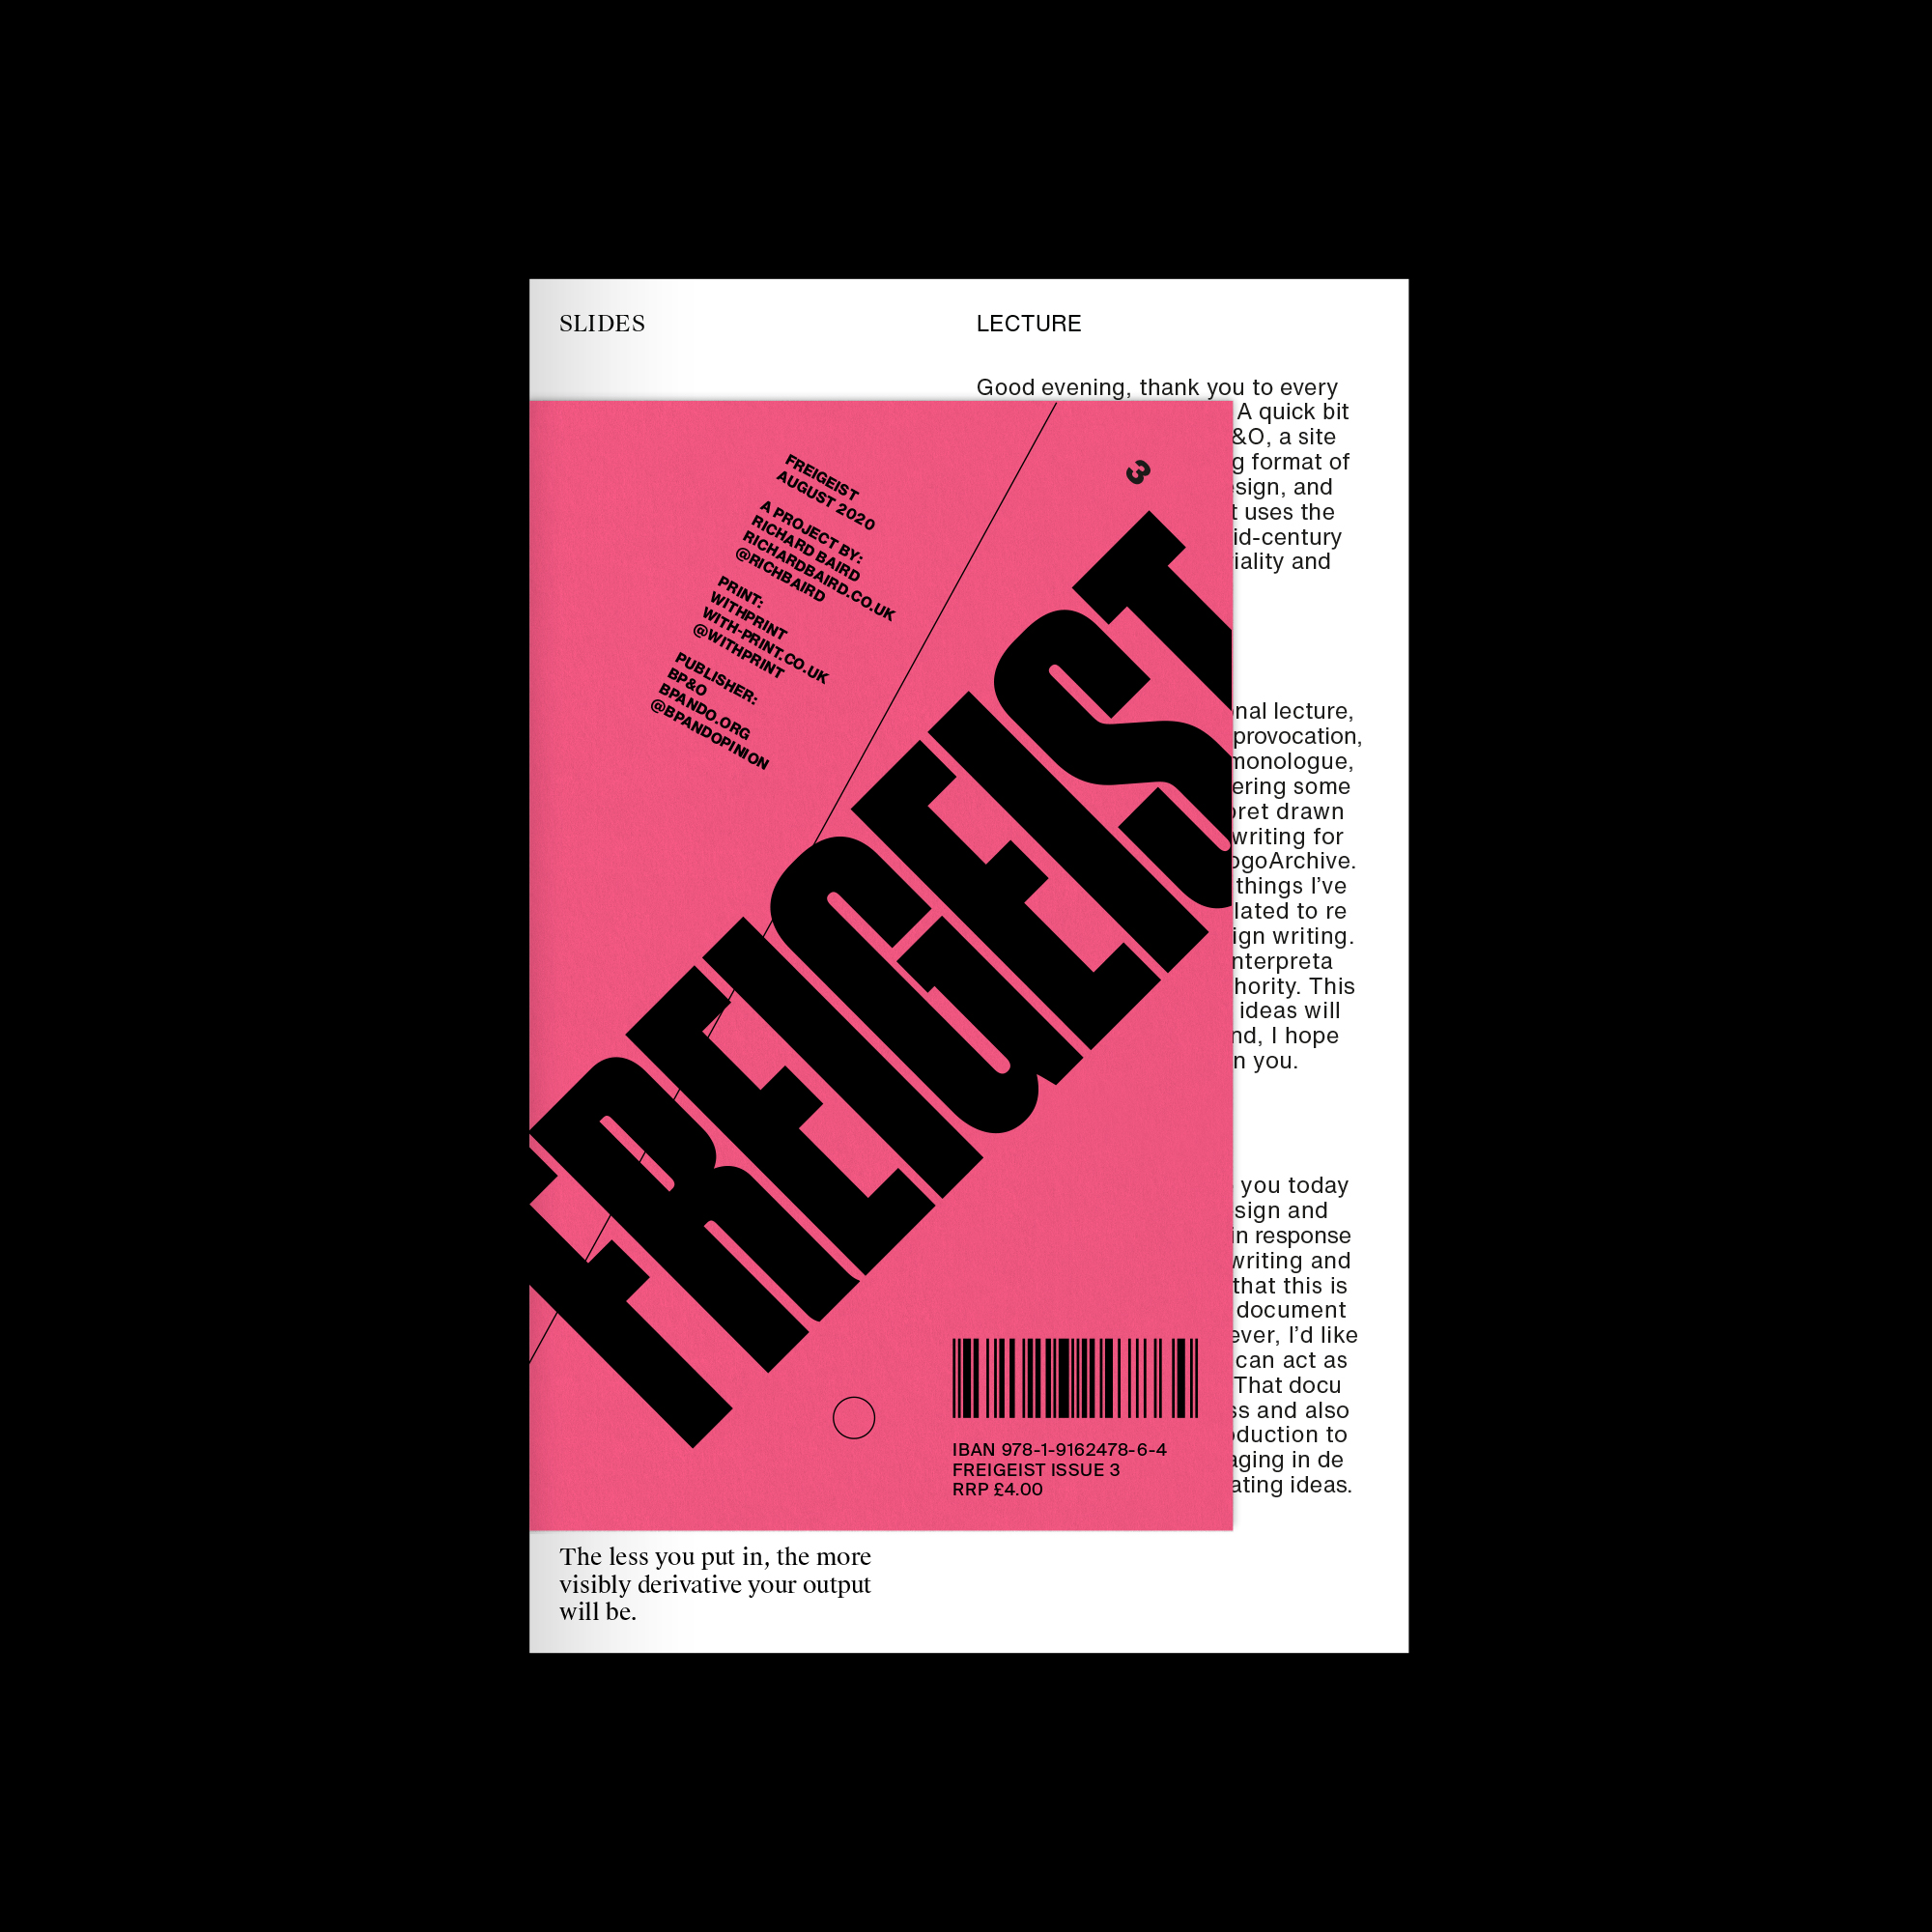 Freigeist Zine Issue 3 designed by Richard Baird, published by BP&O